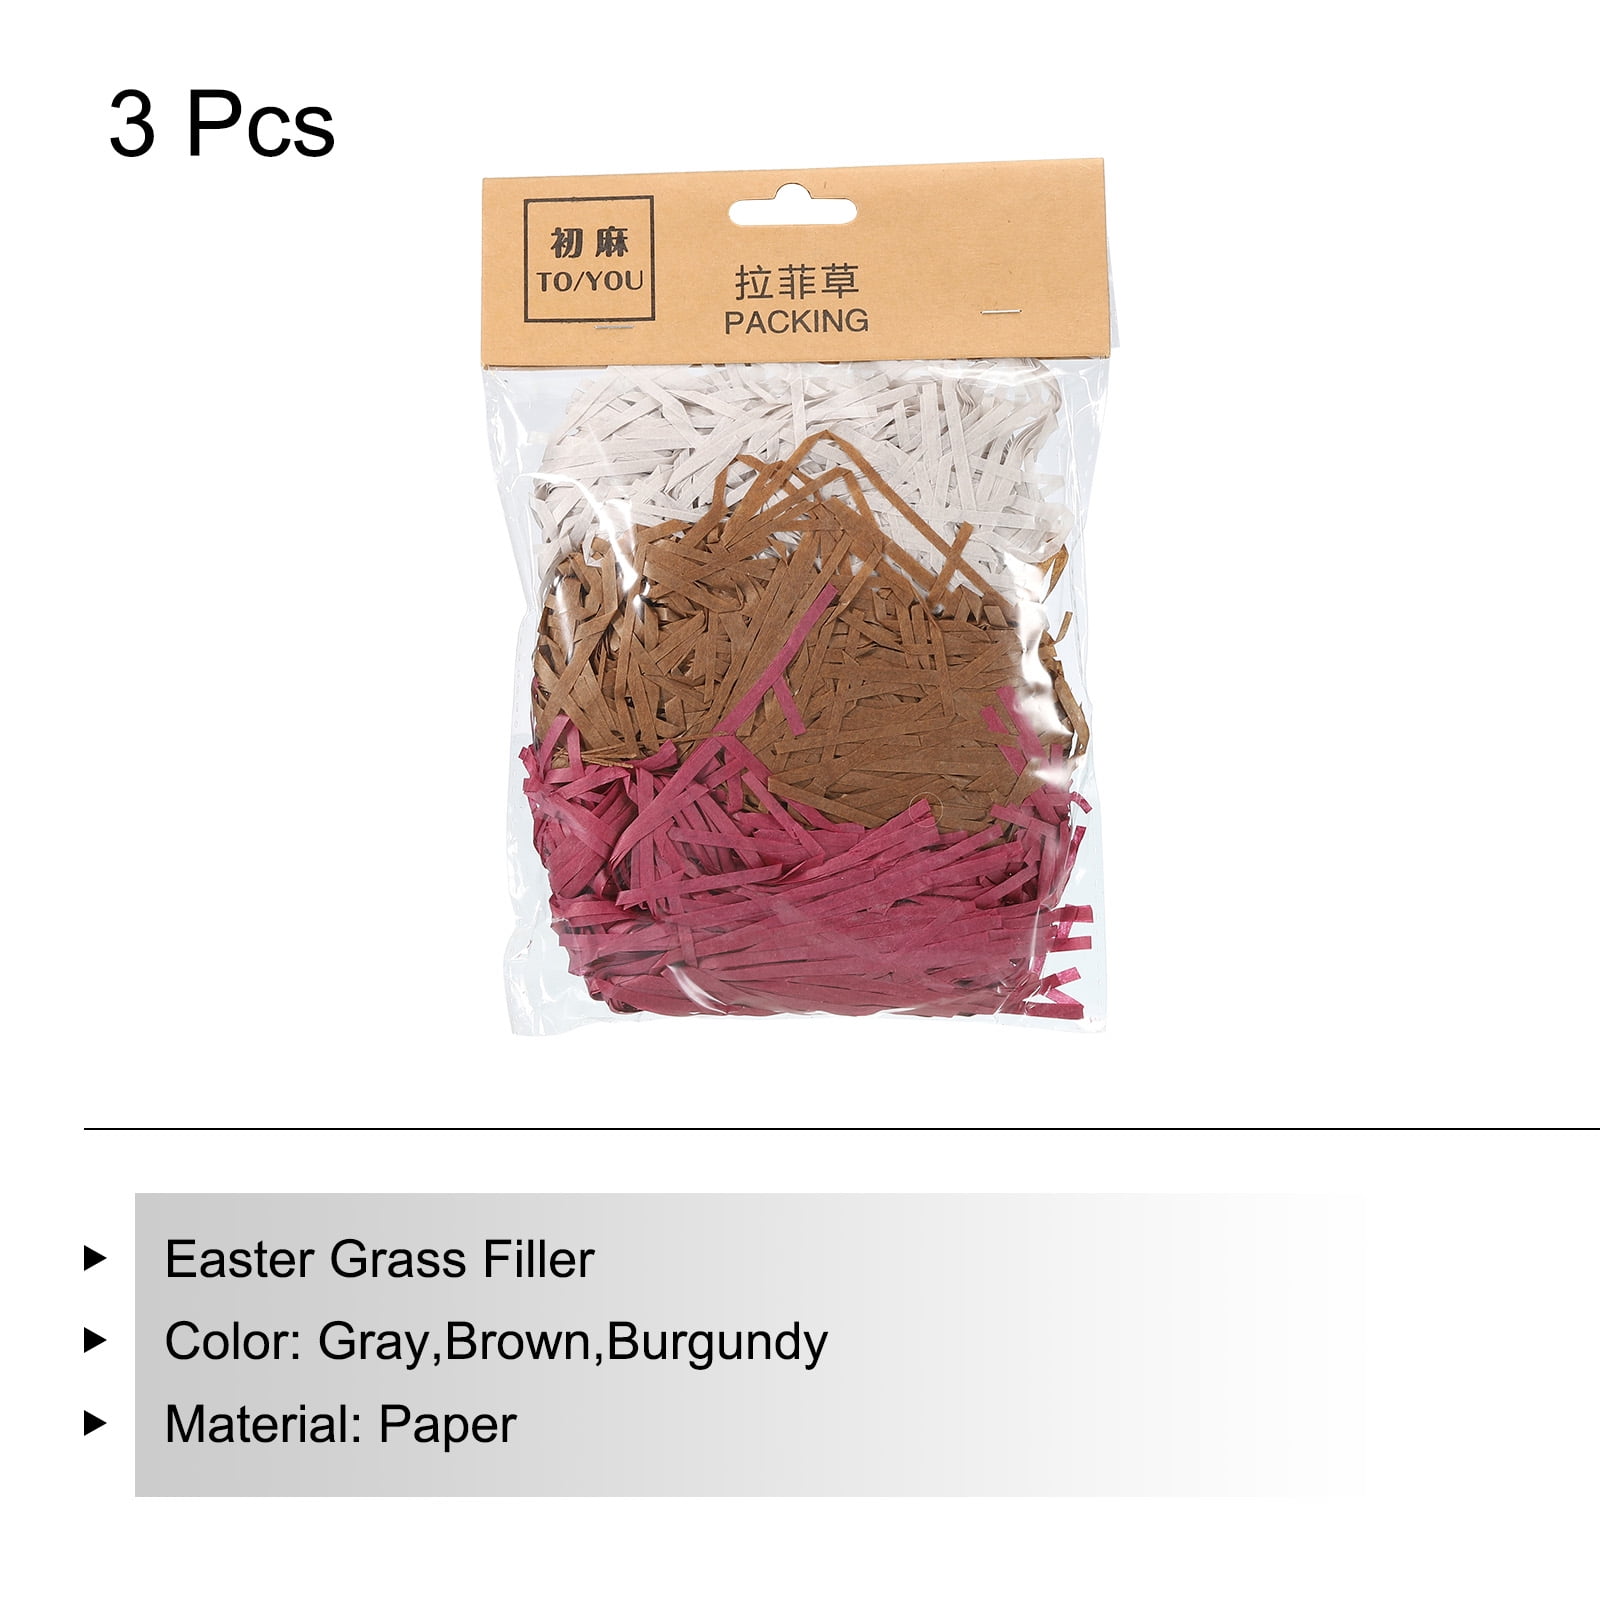 Uxcell Easter Grass Basket Filler Grass 3 Color (Brown,Burgundy,Blue)  Raffia Recyclable Paper for Gift Packaging 3 Pack 